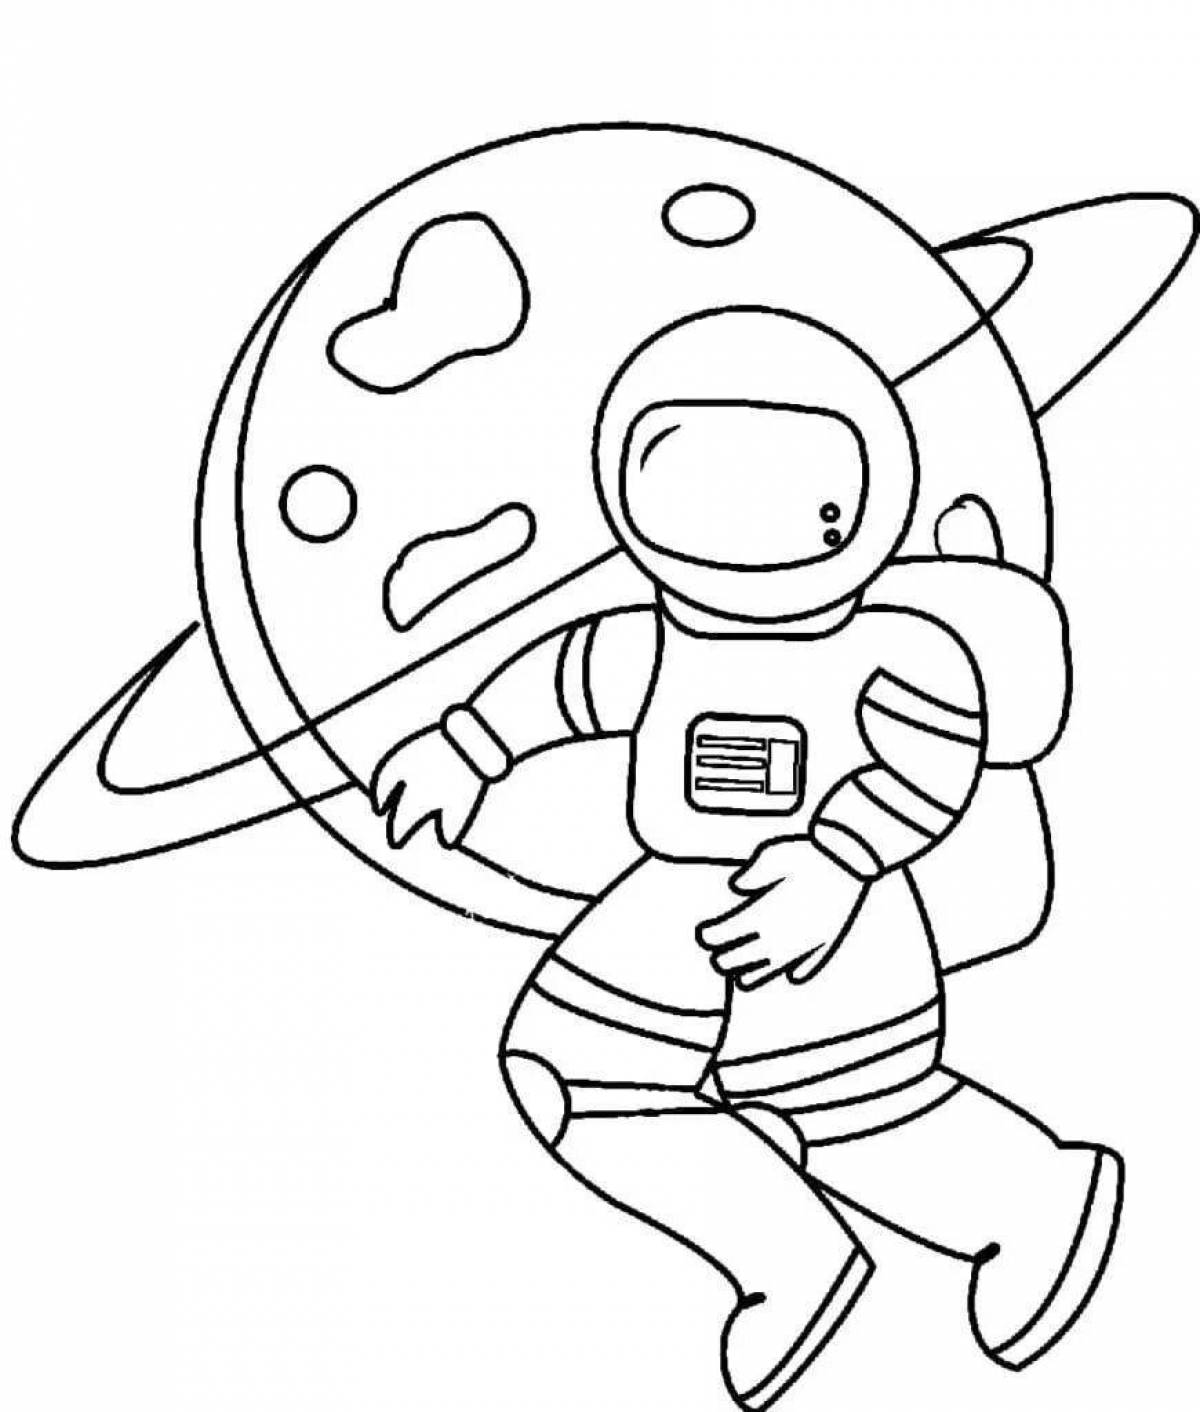 An elegant astronaut in a space suit